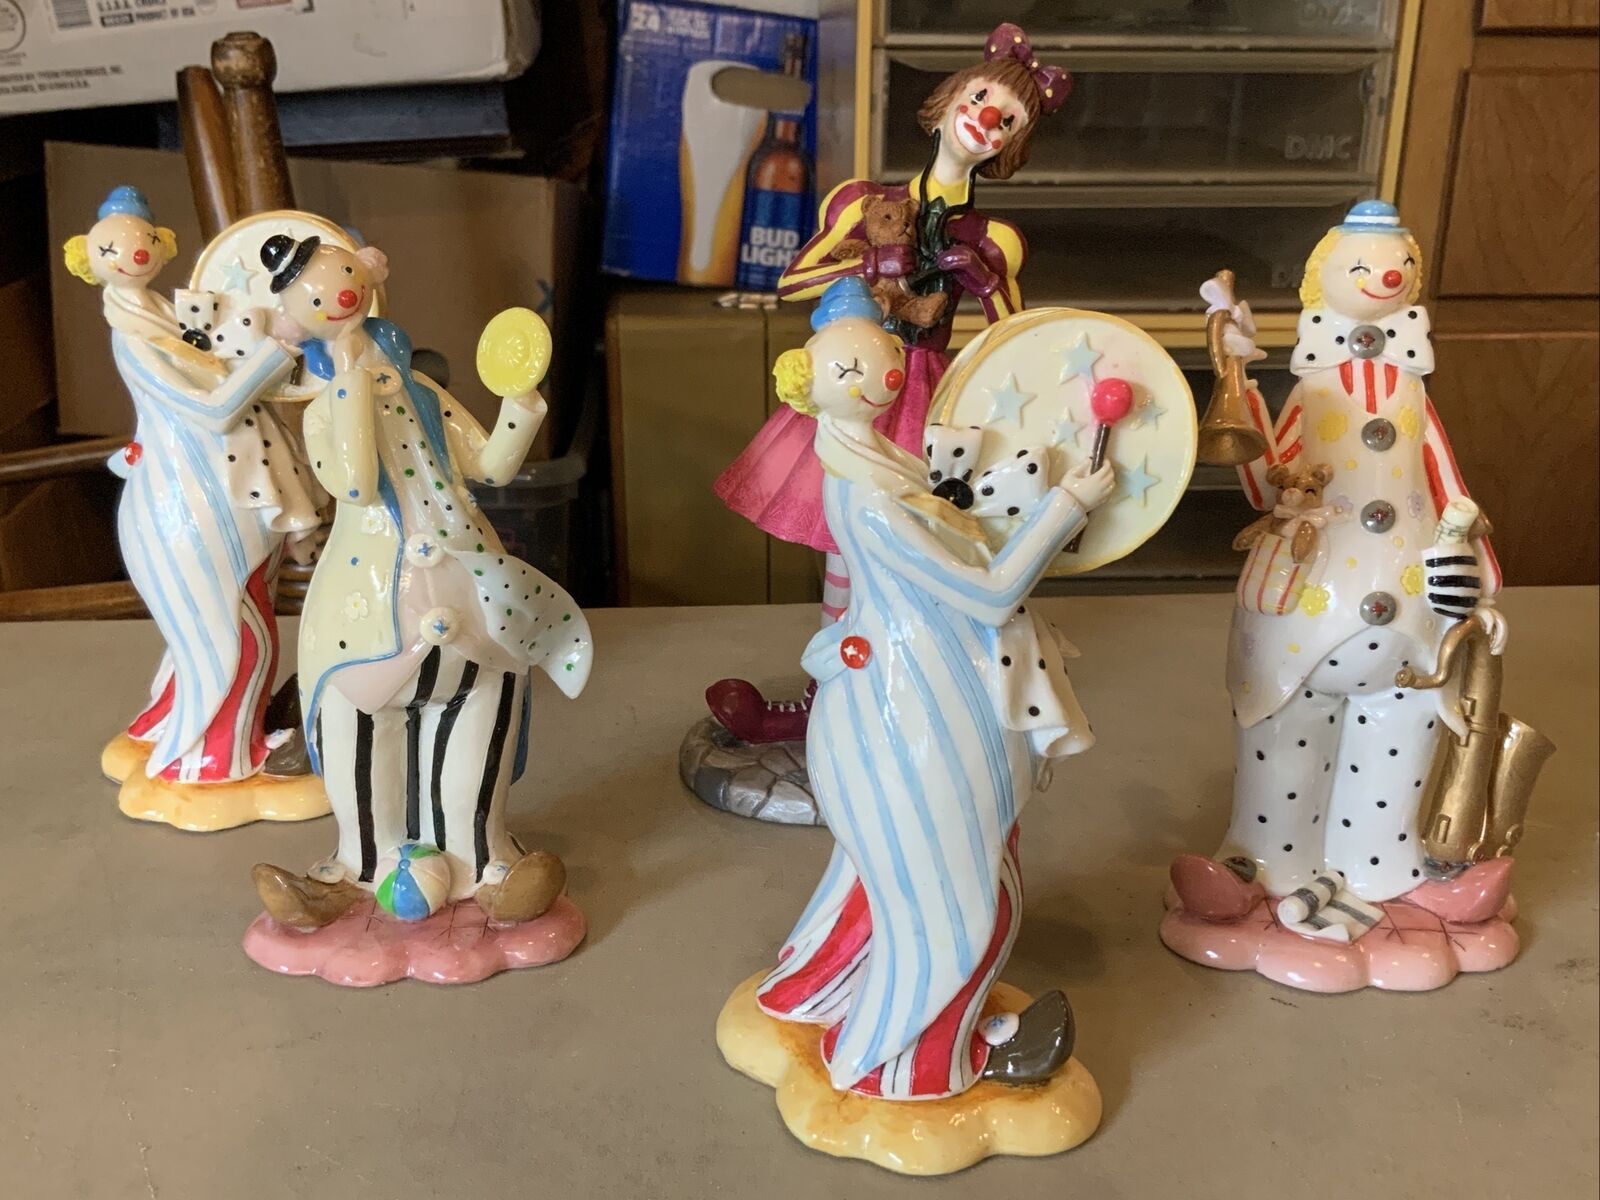 LOT OF 5 VINTAGE HERCO GIFT PROFESSIONAL CLOWN FIGURES FIGURINES 